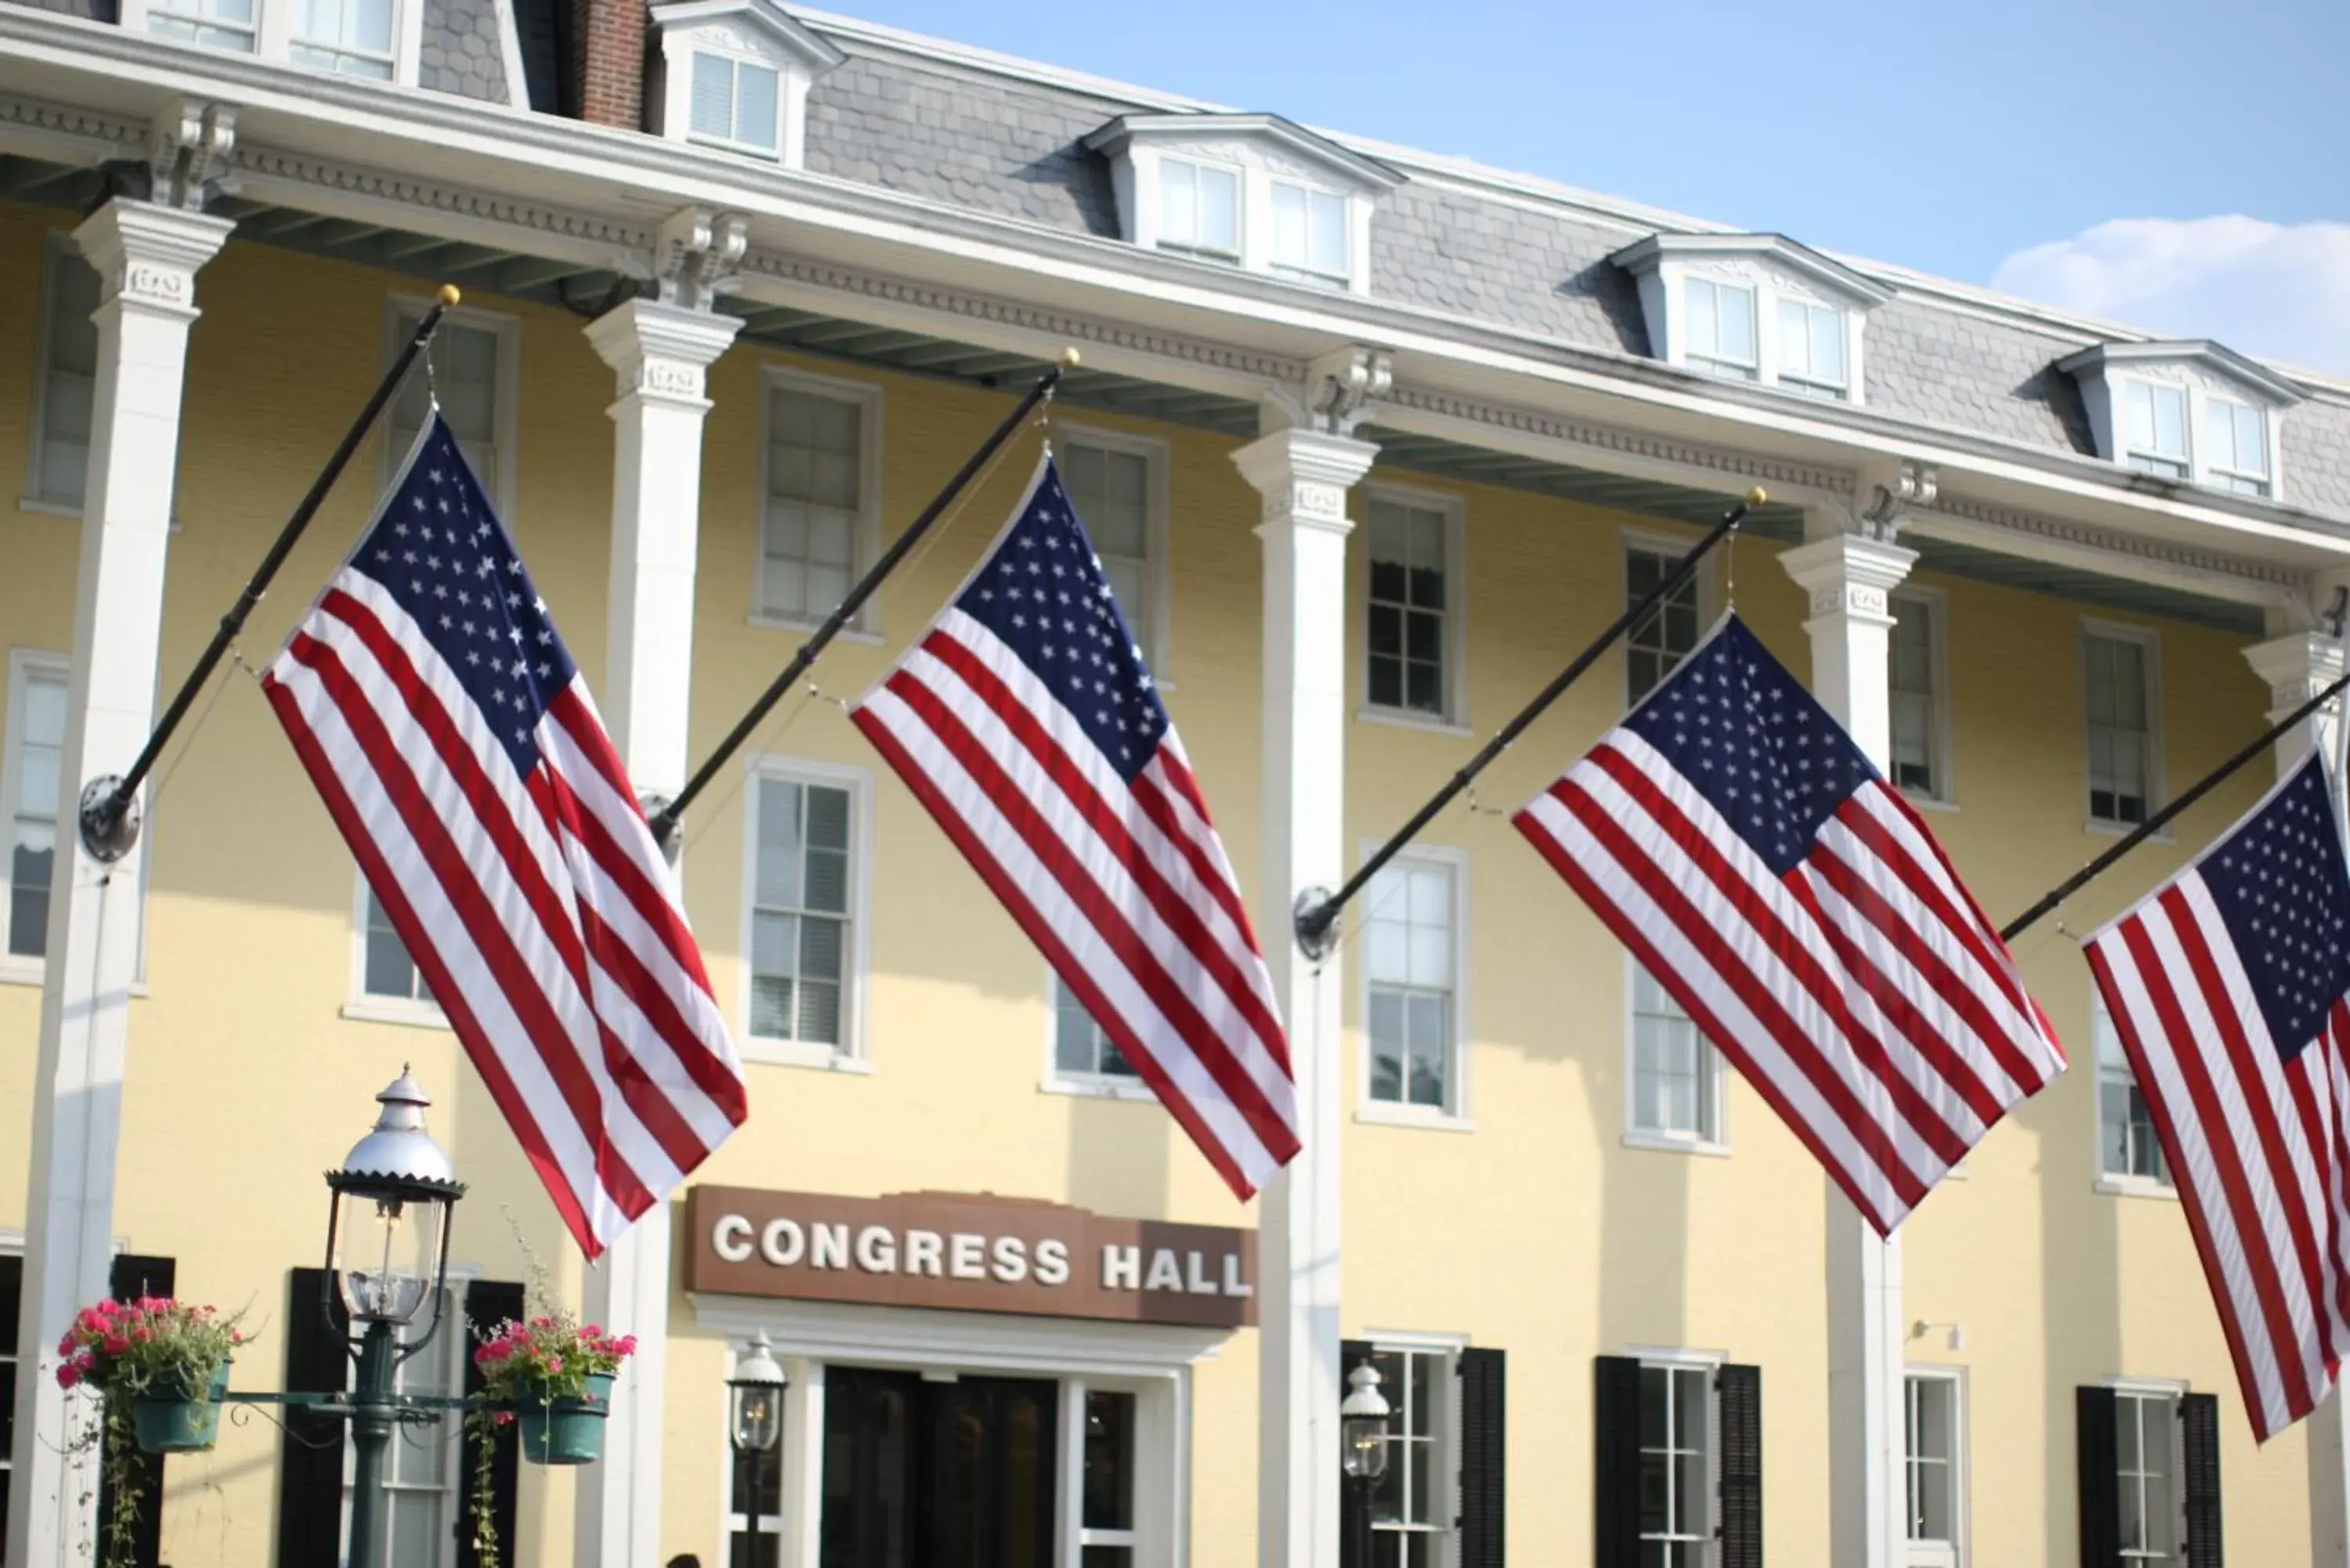 Property Building in Congress Hall